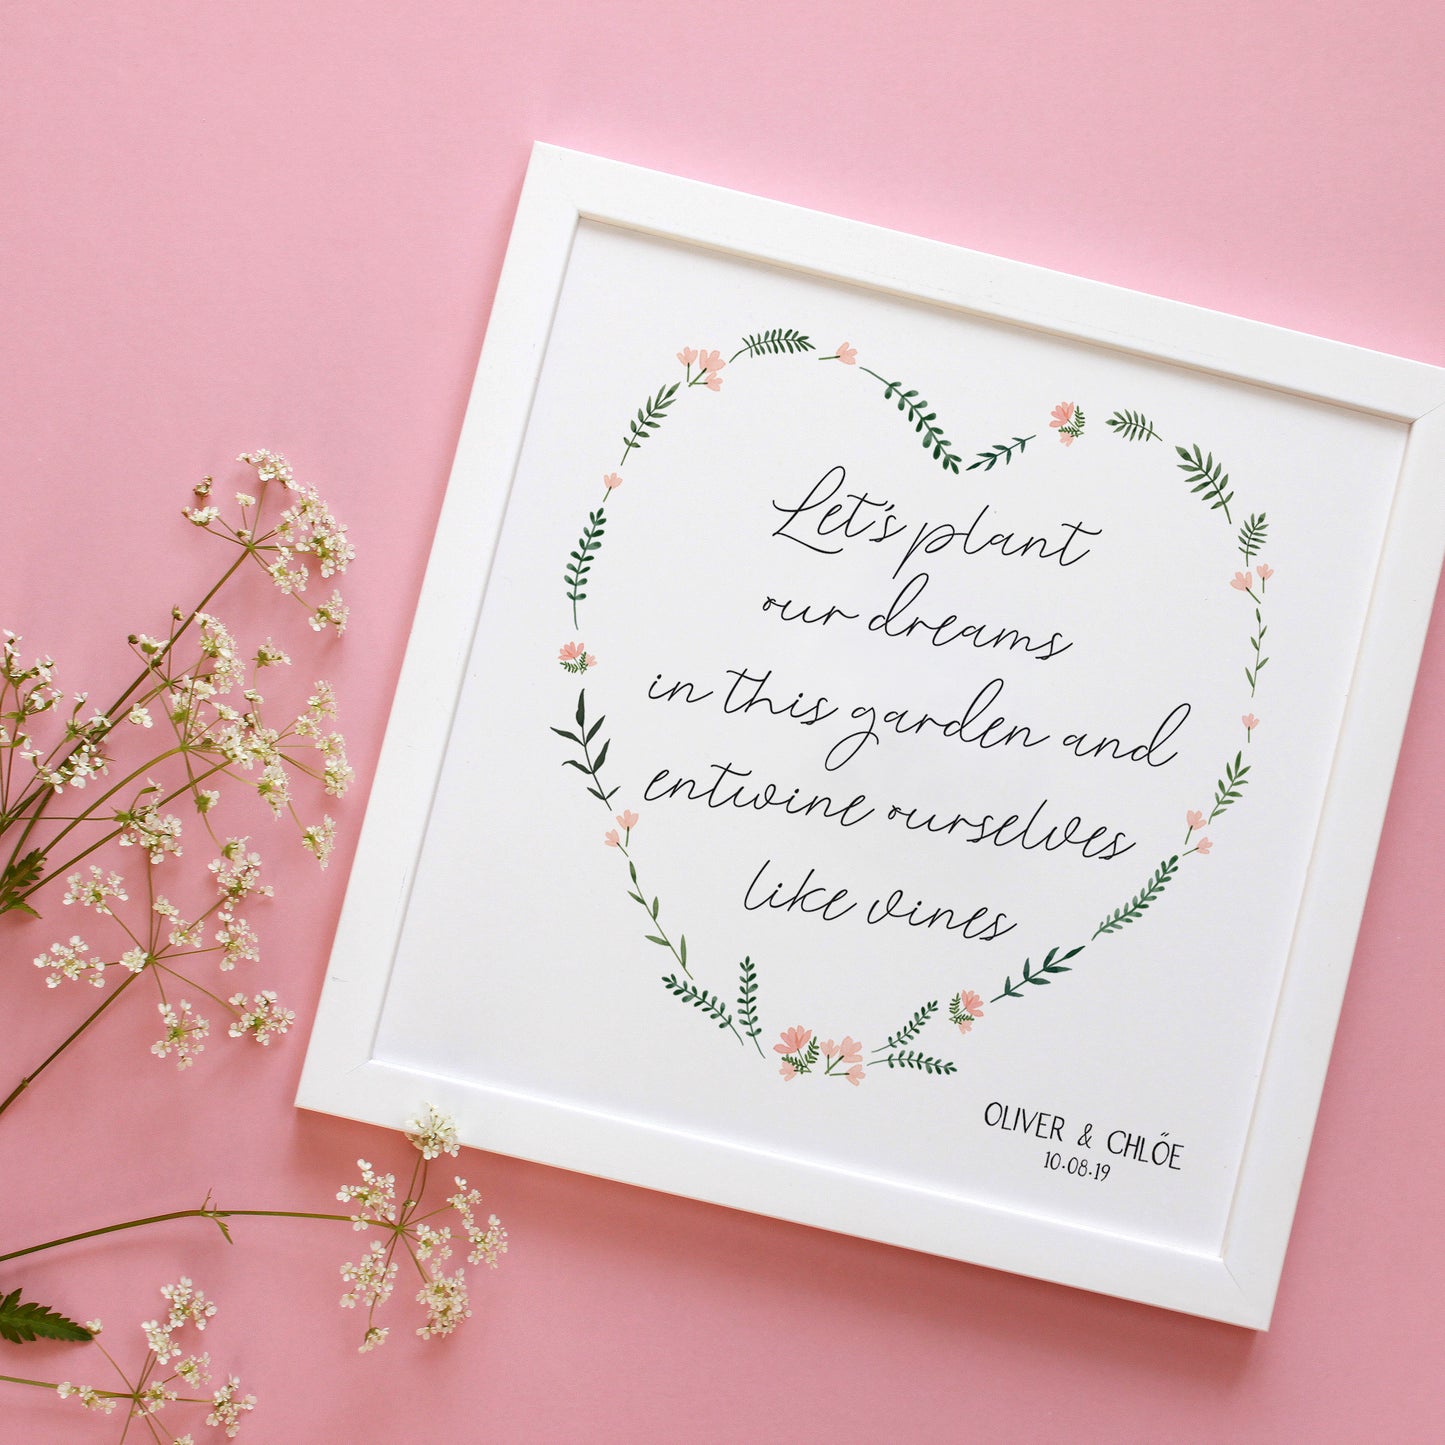 engagement floral heart with quote in a white frame on a pink background